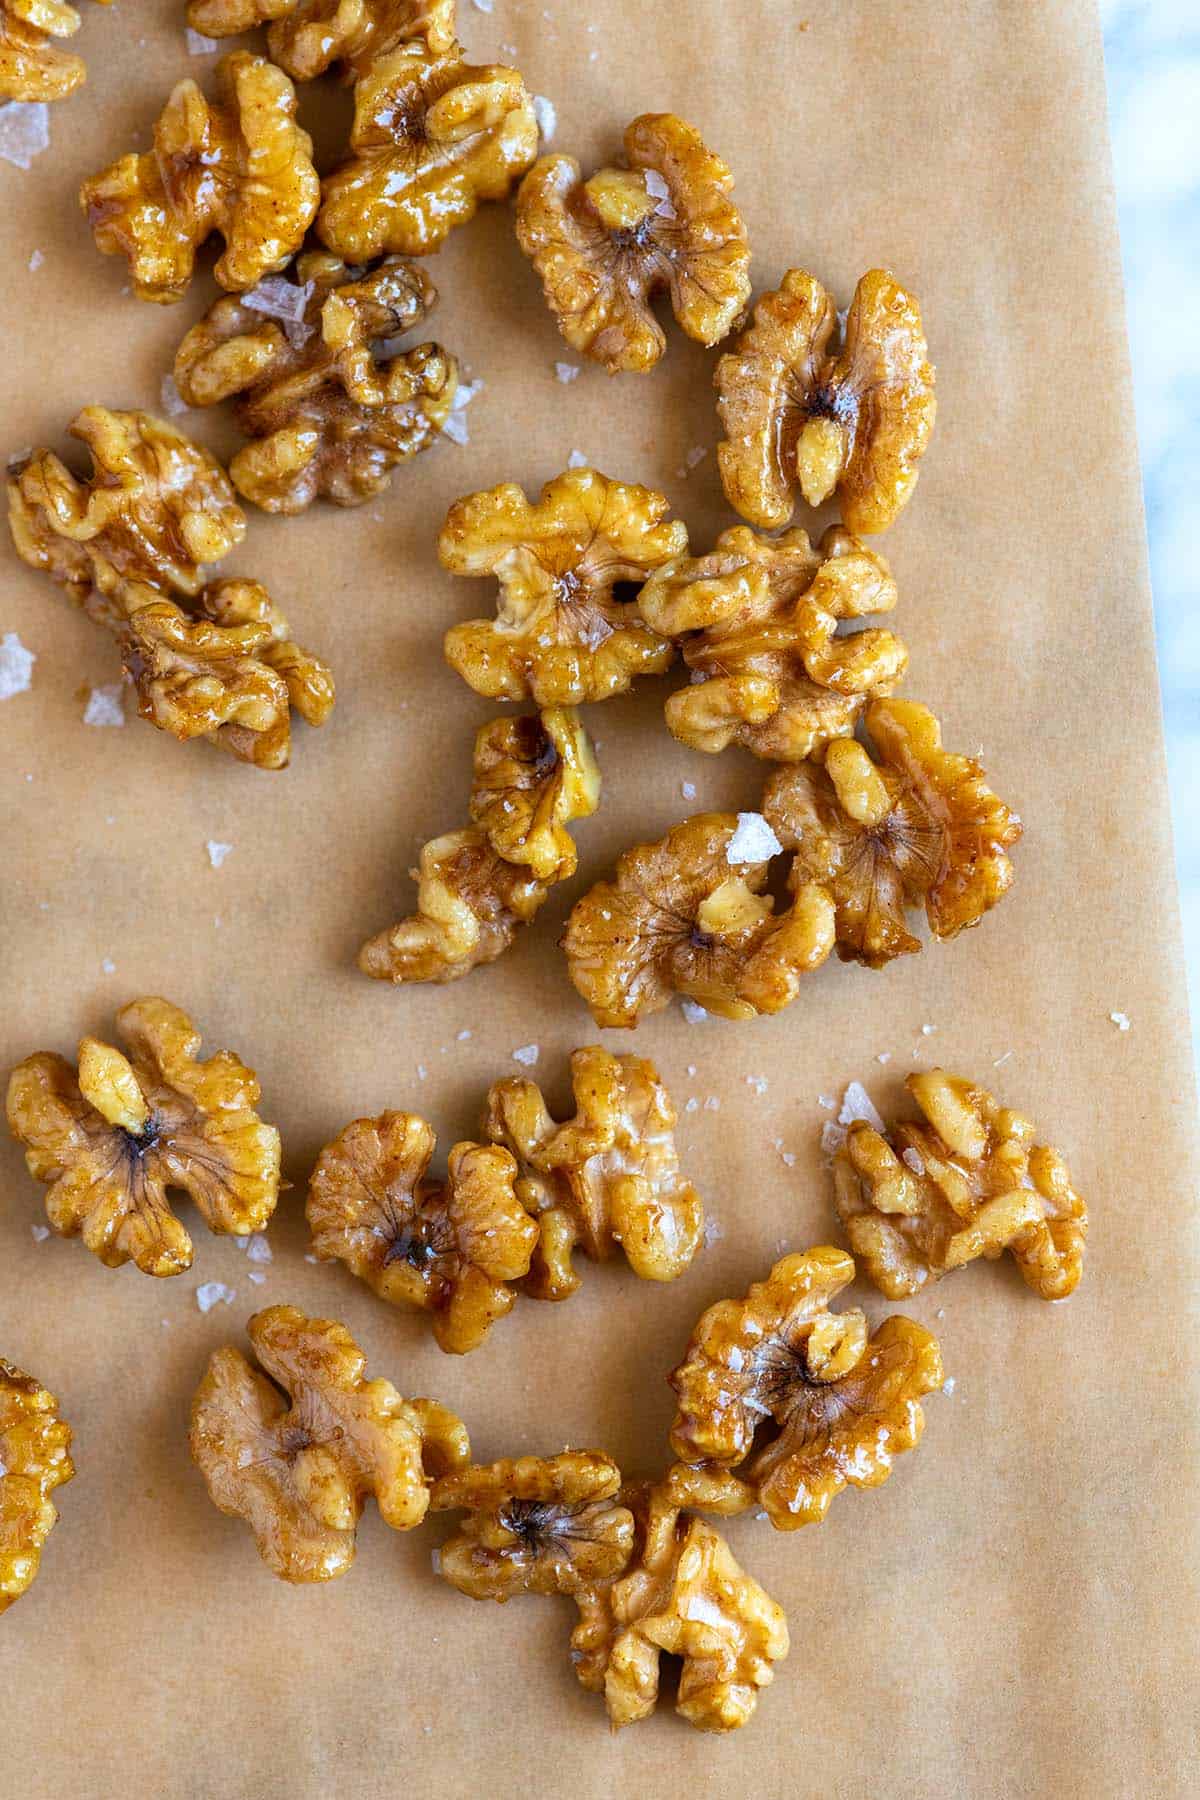 Maple candied walnuts ready for the strawberry salad